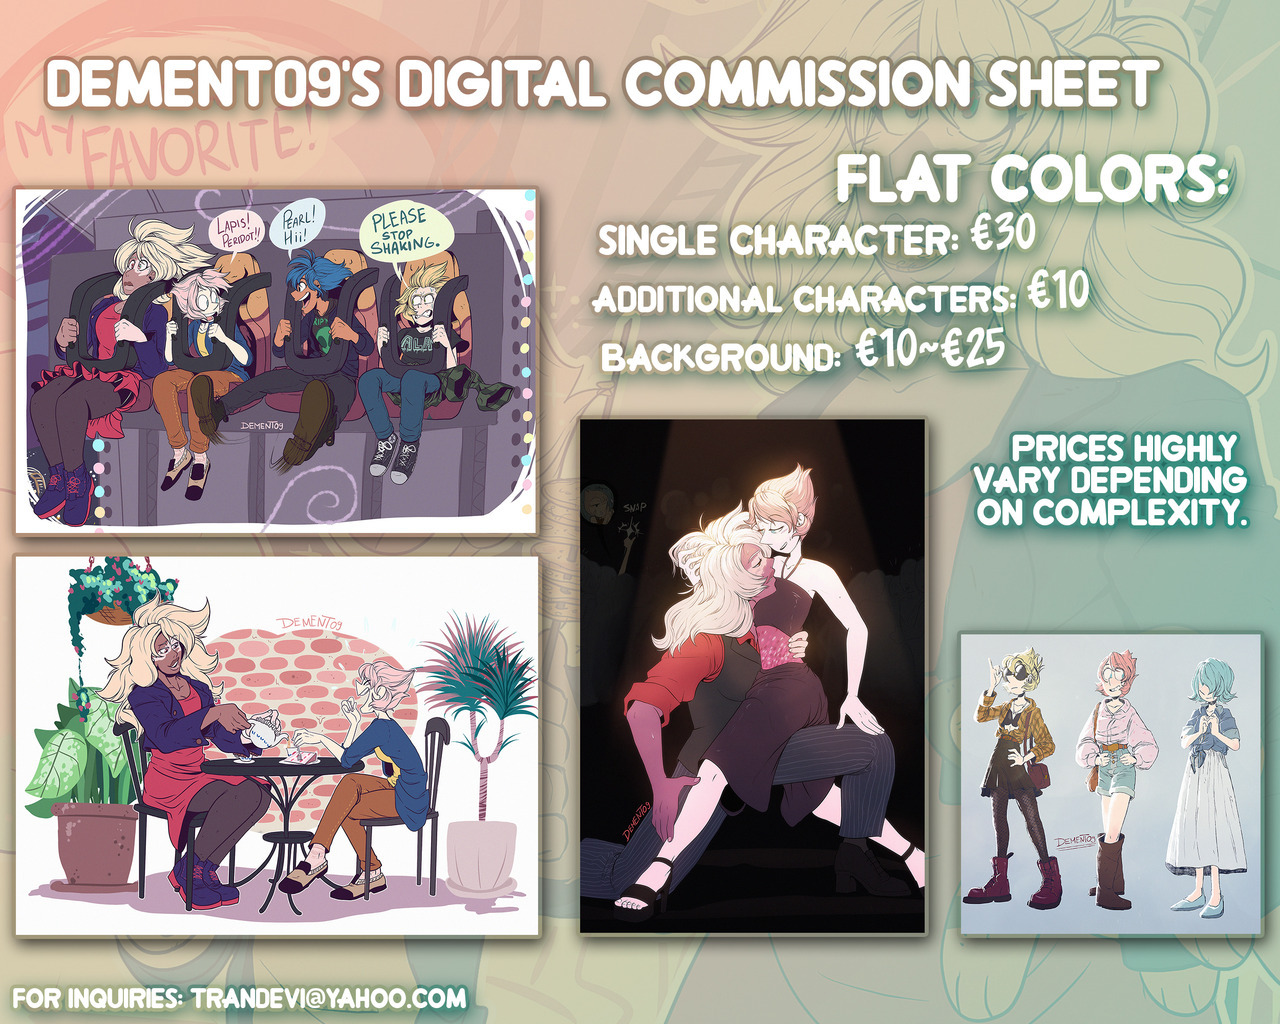 dement09: &gt;TRADITIONAL COMMISSIONS INFO&lt; If you can’t afford a commission